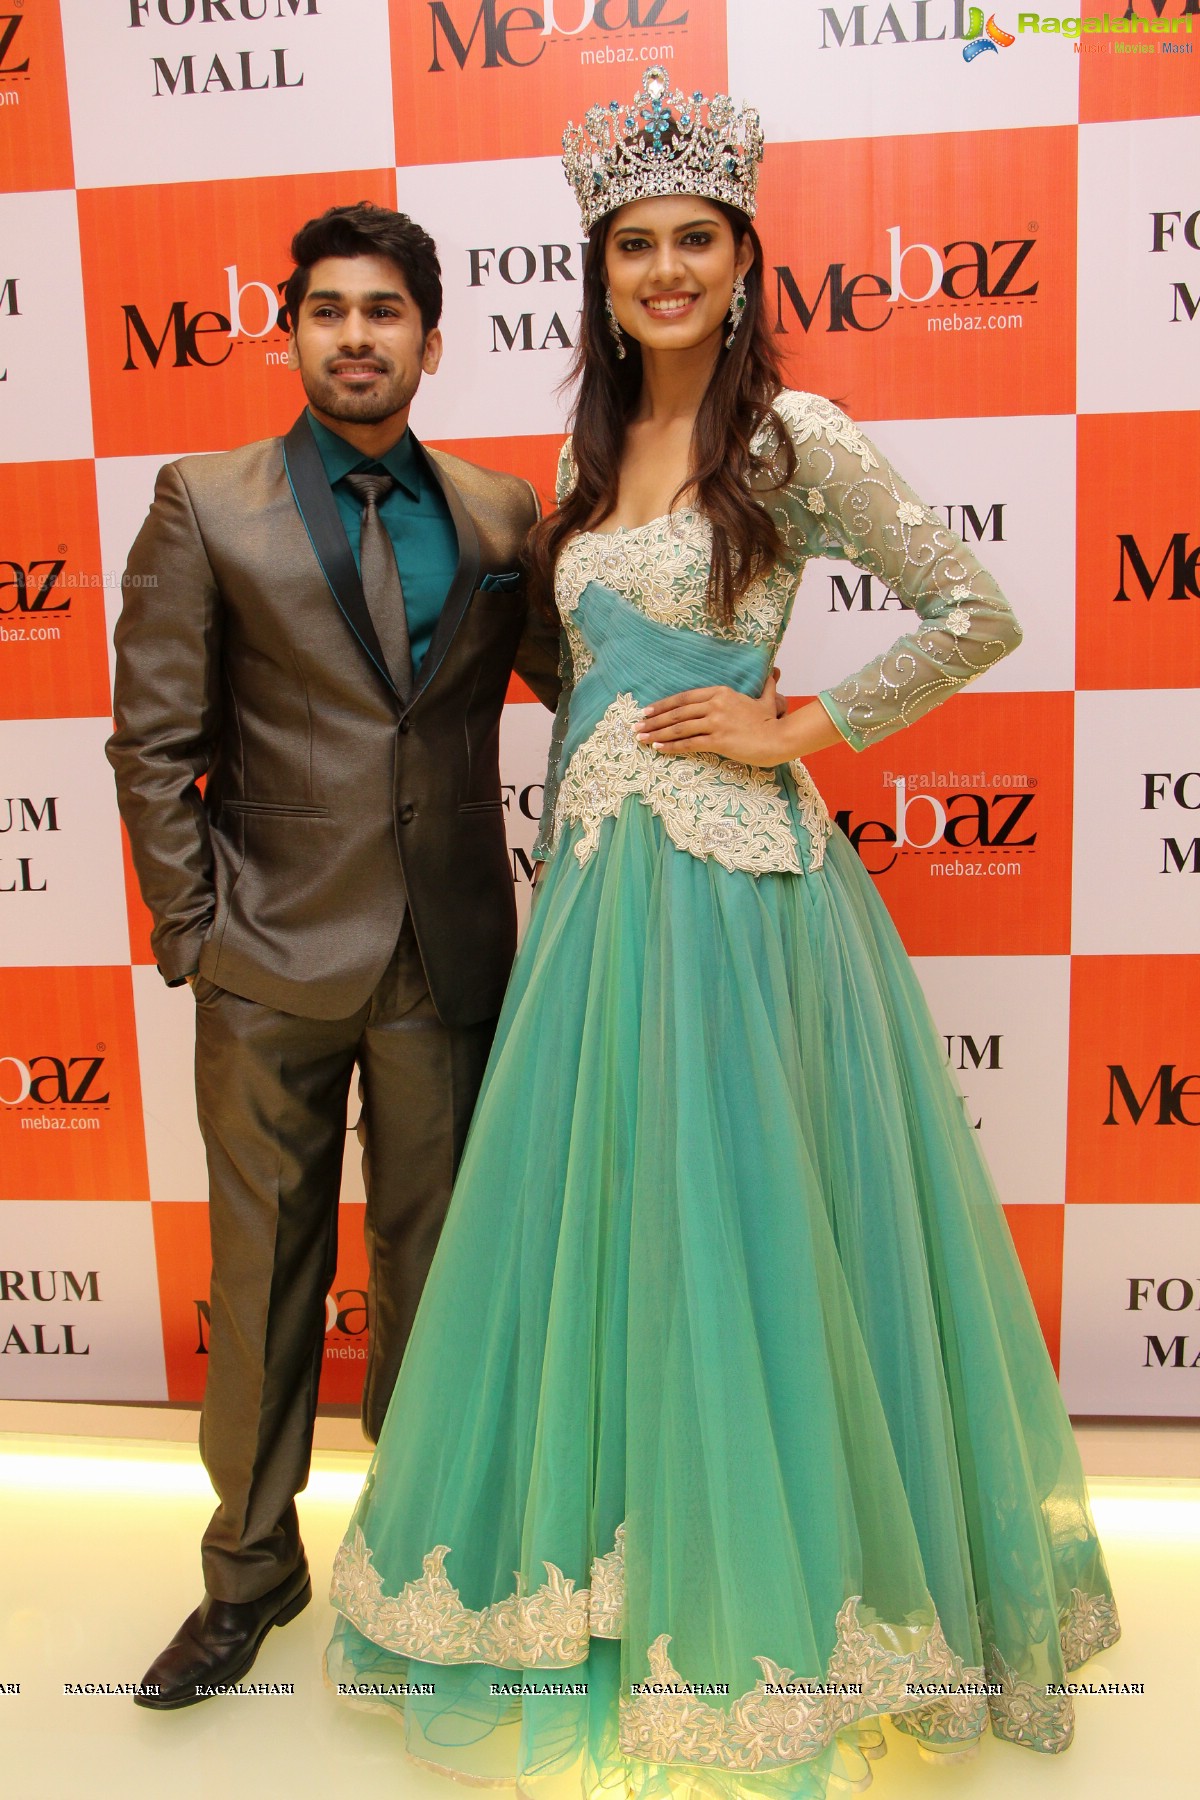 The Exclusive Mebaz Family Collection & Cocktail Bridal Fiesta Launch